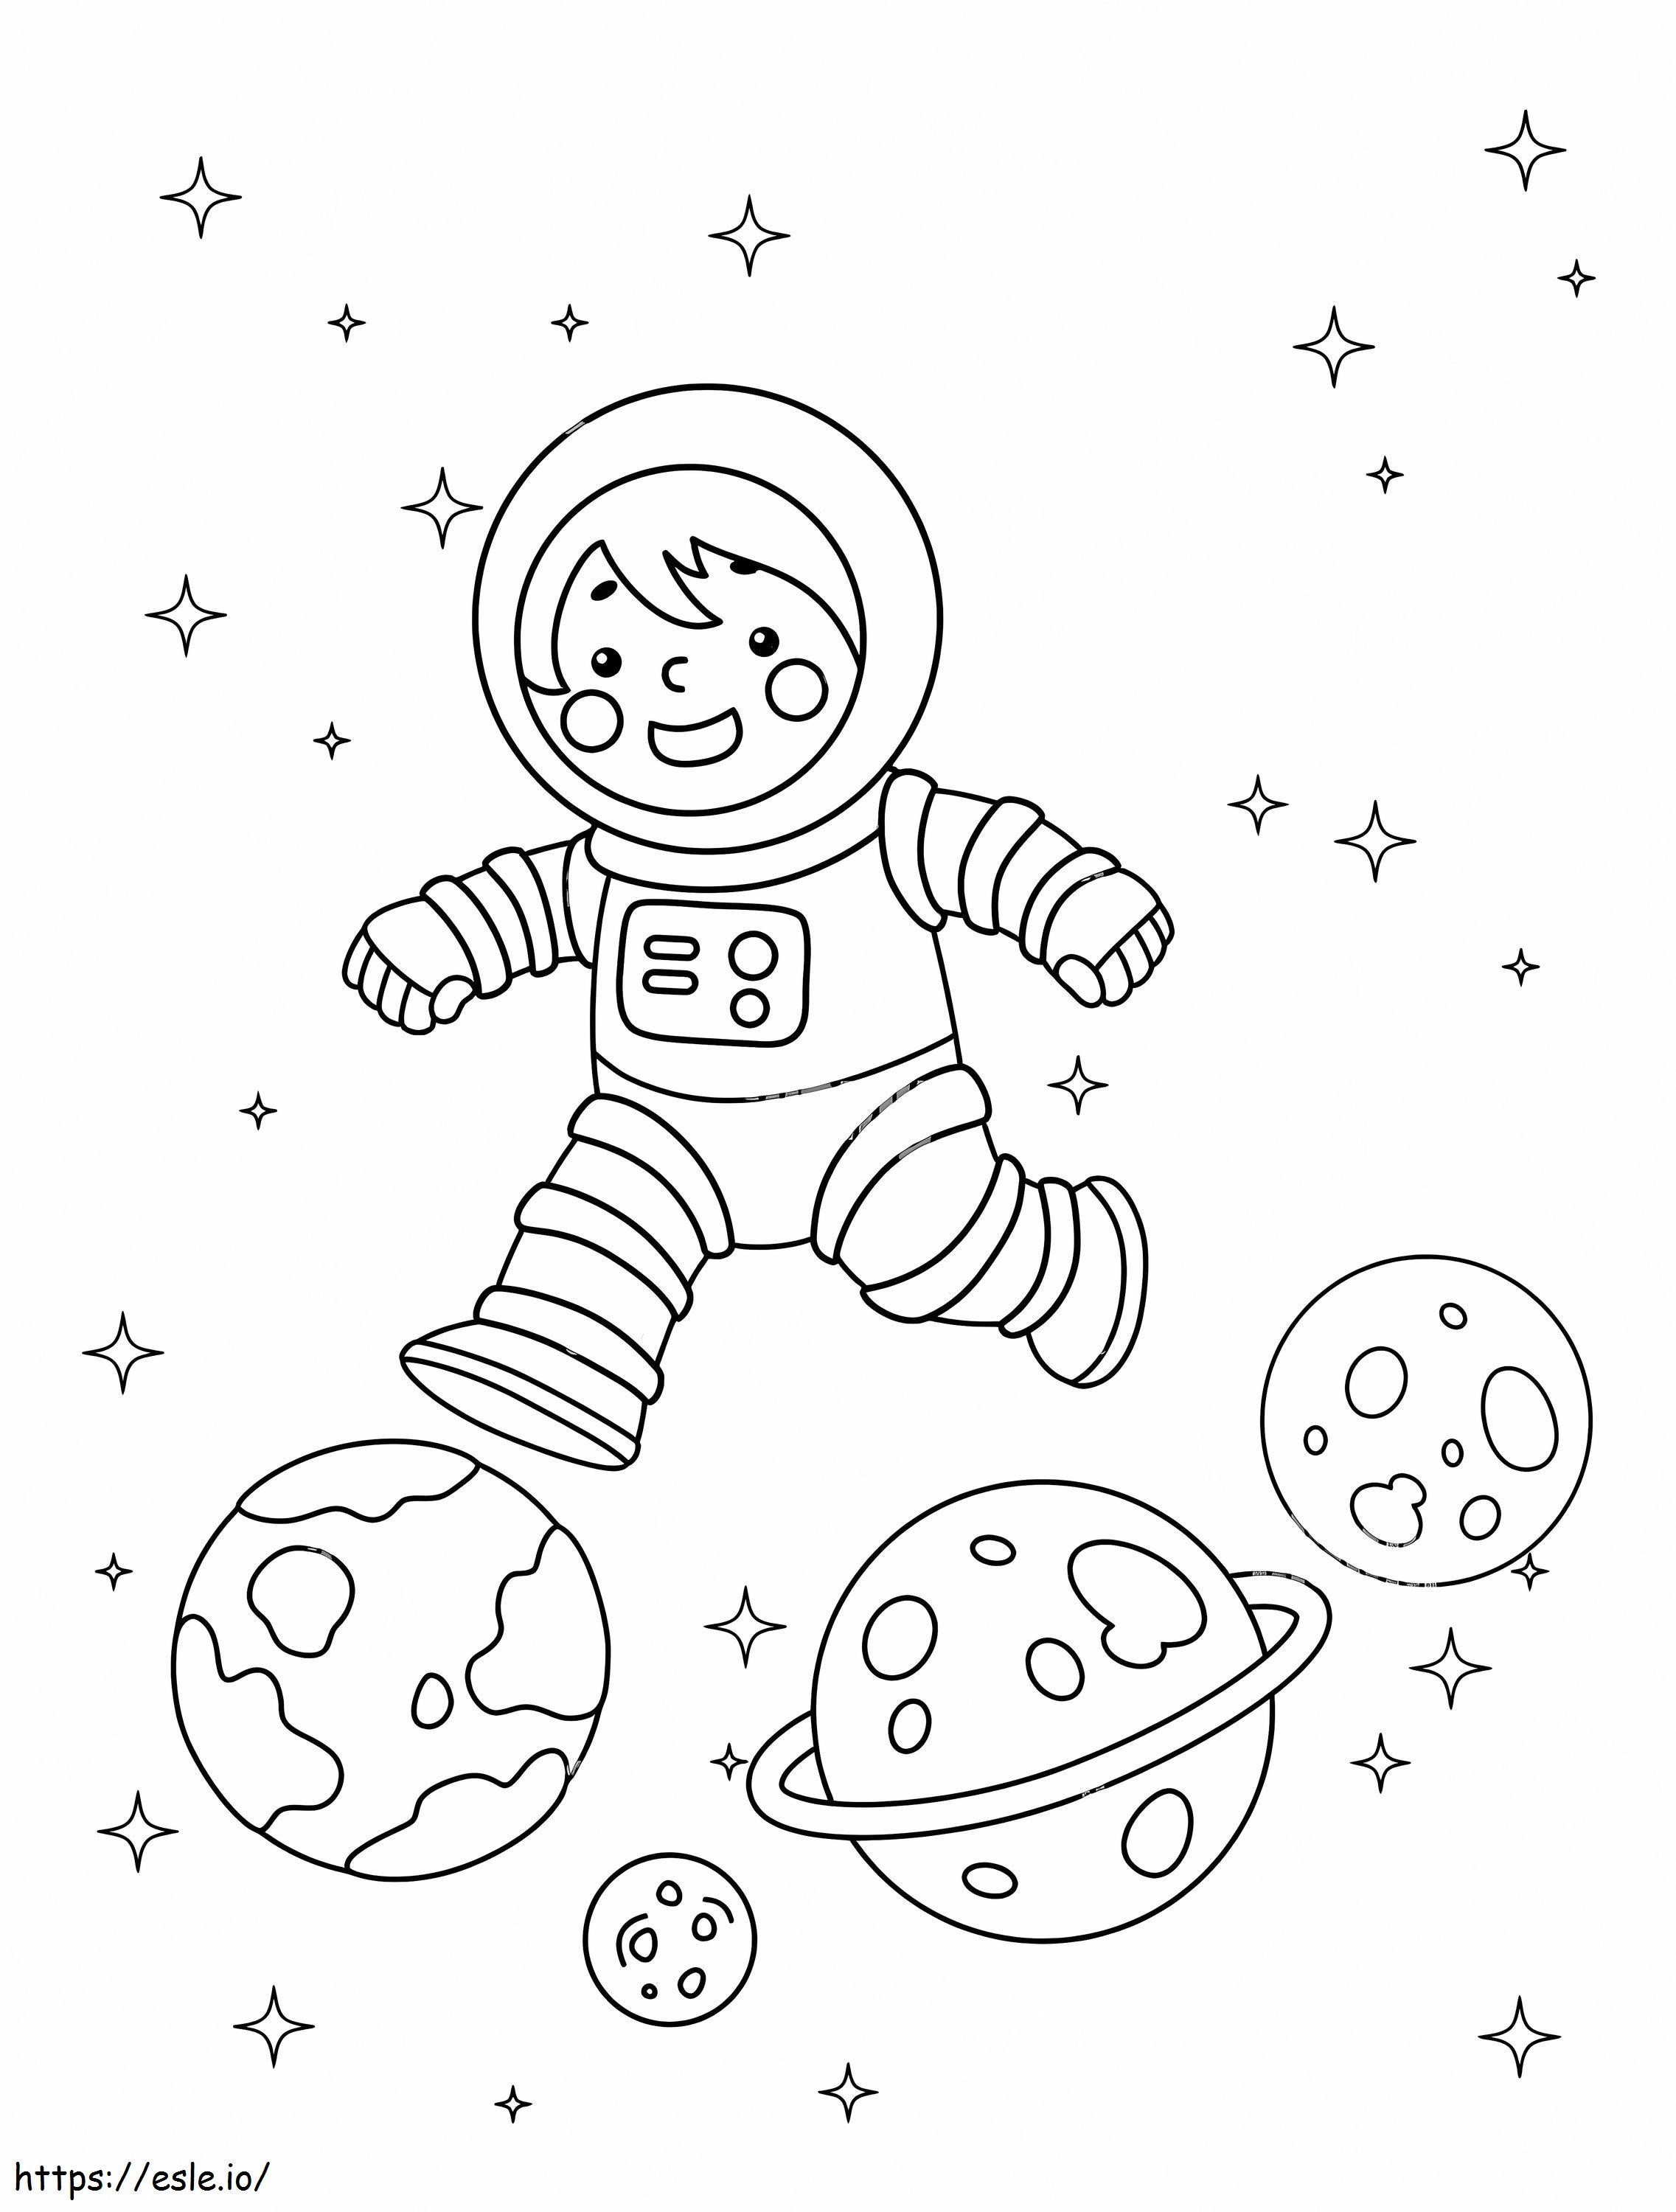 The Astronaut And The Planets coloring page